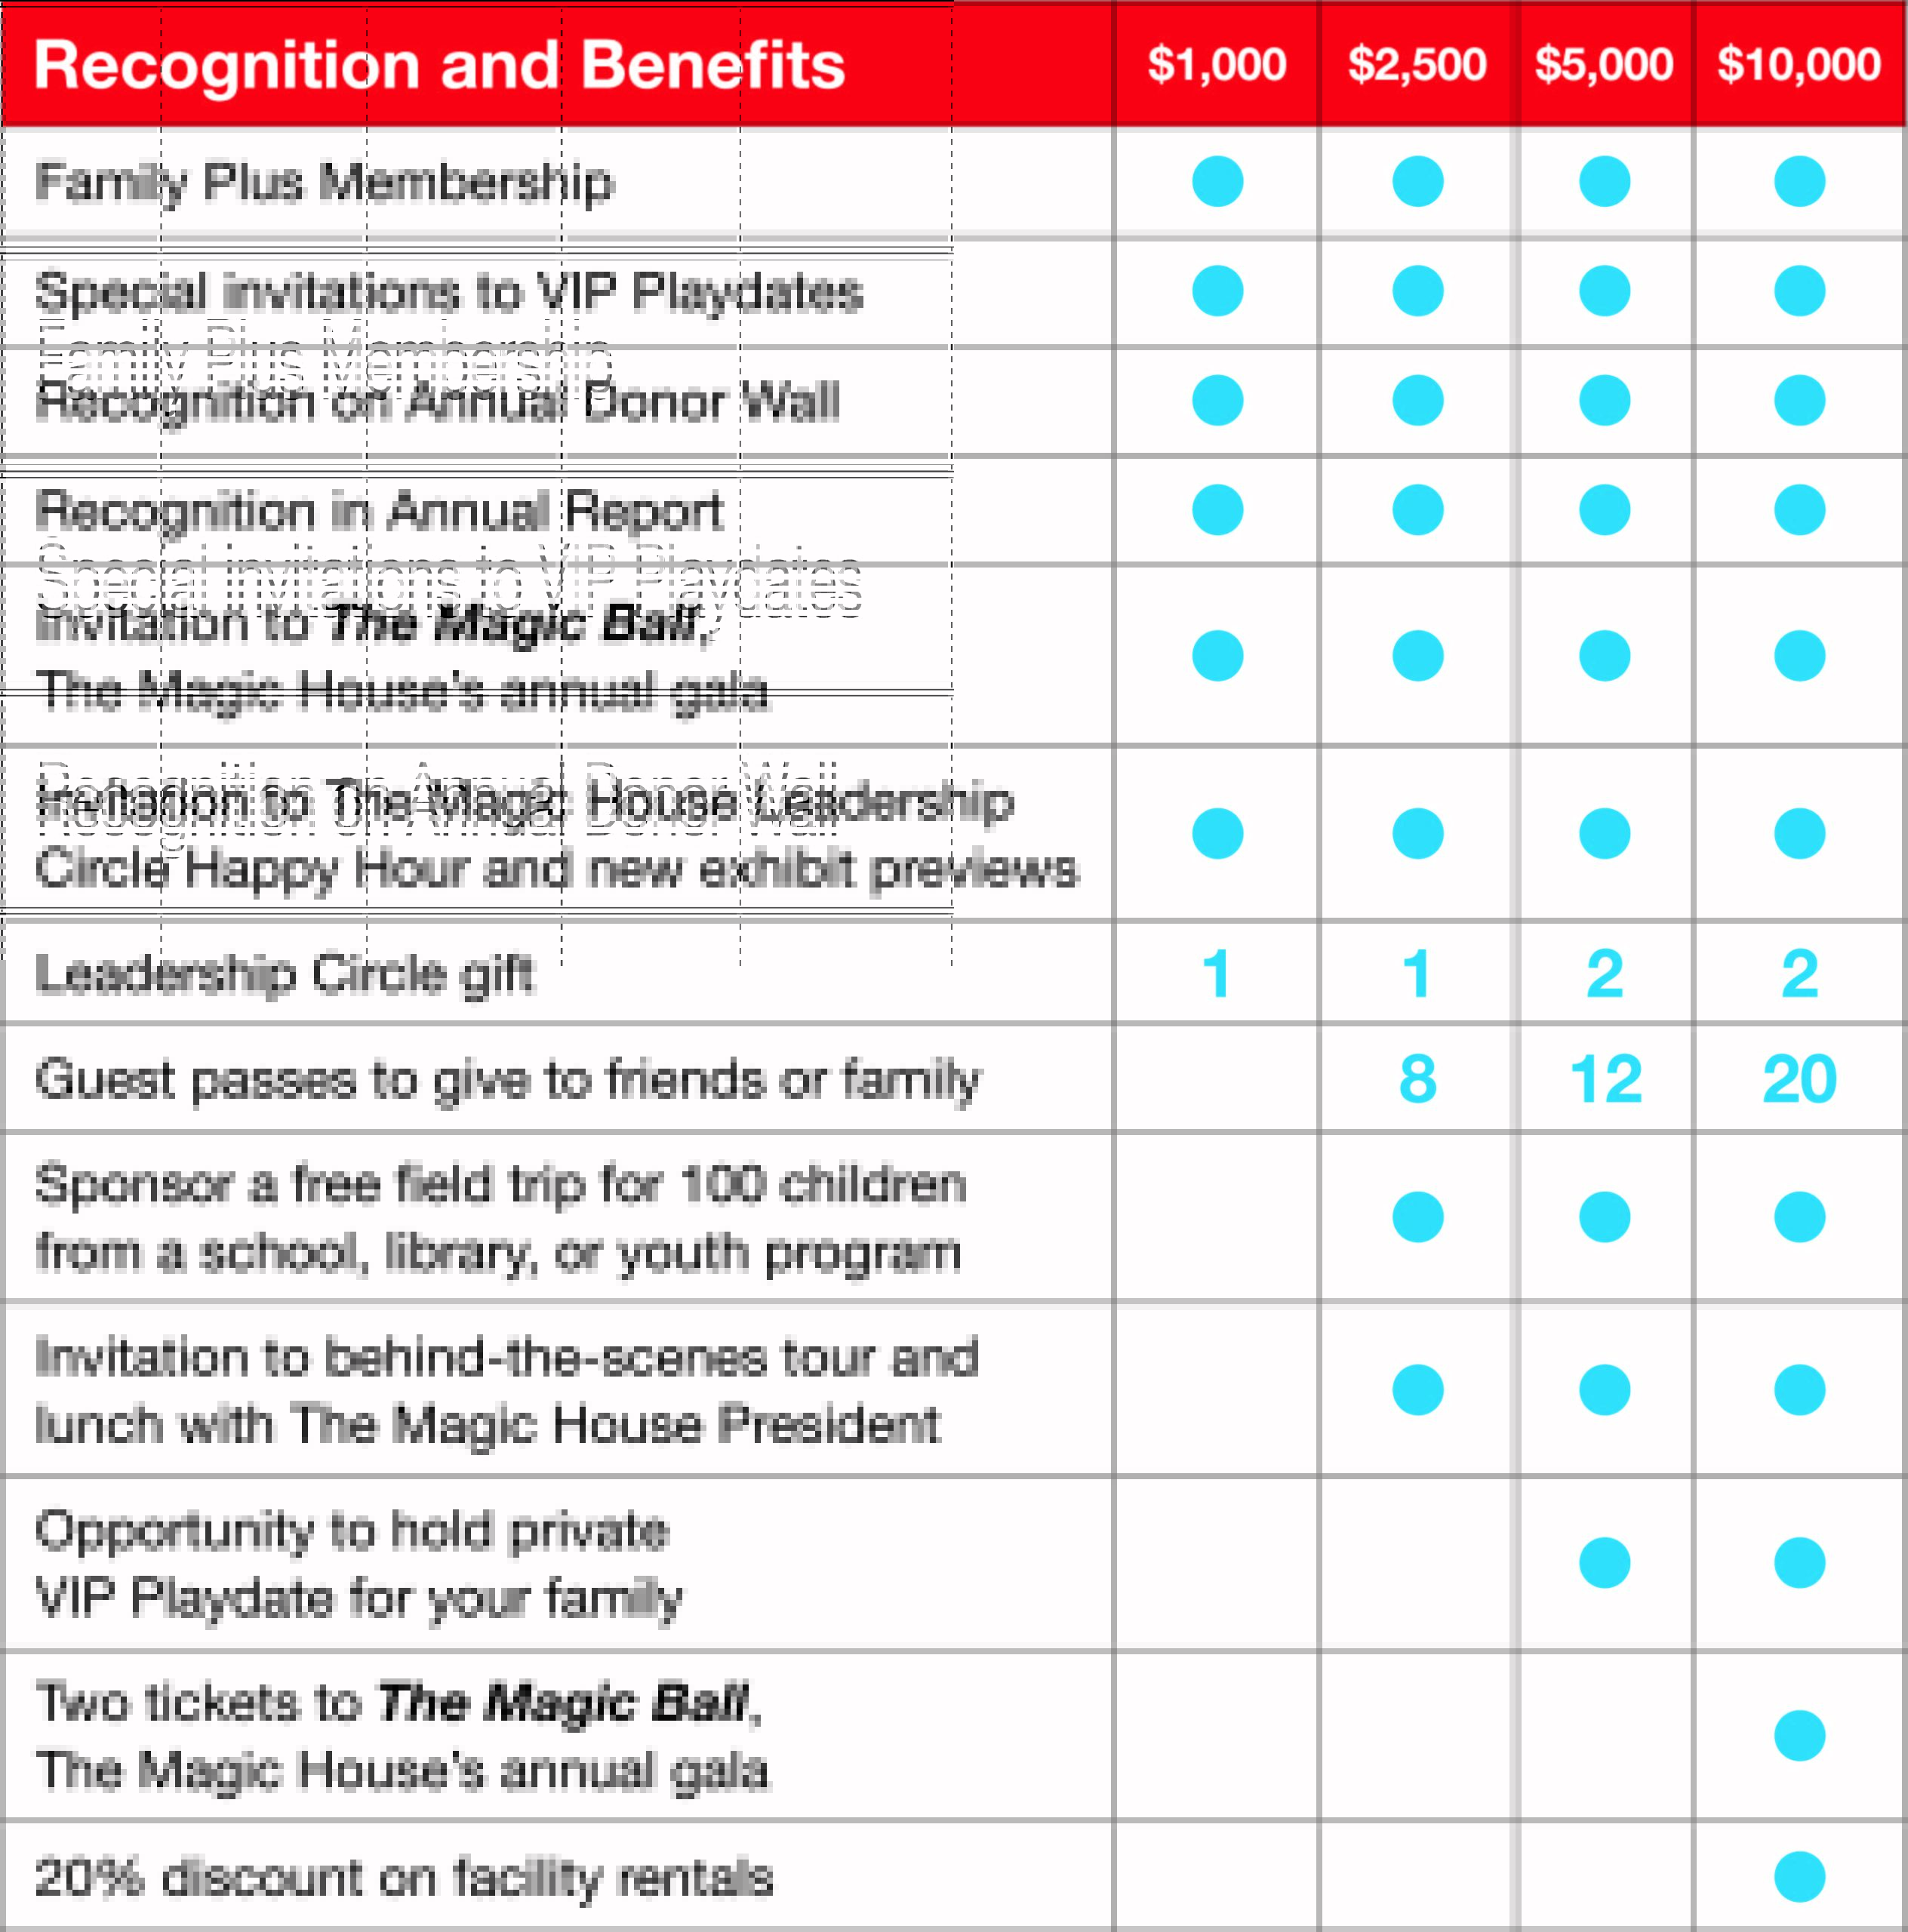 Recognition and Benefits